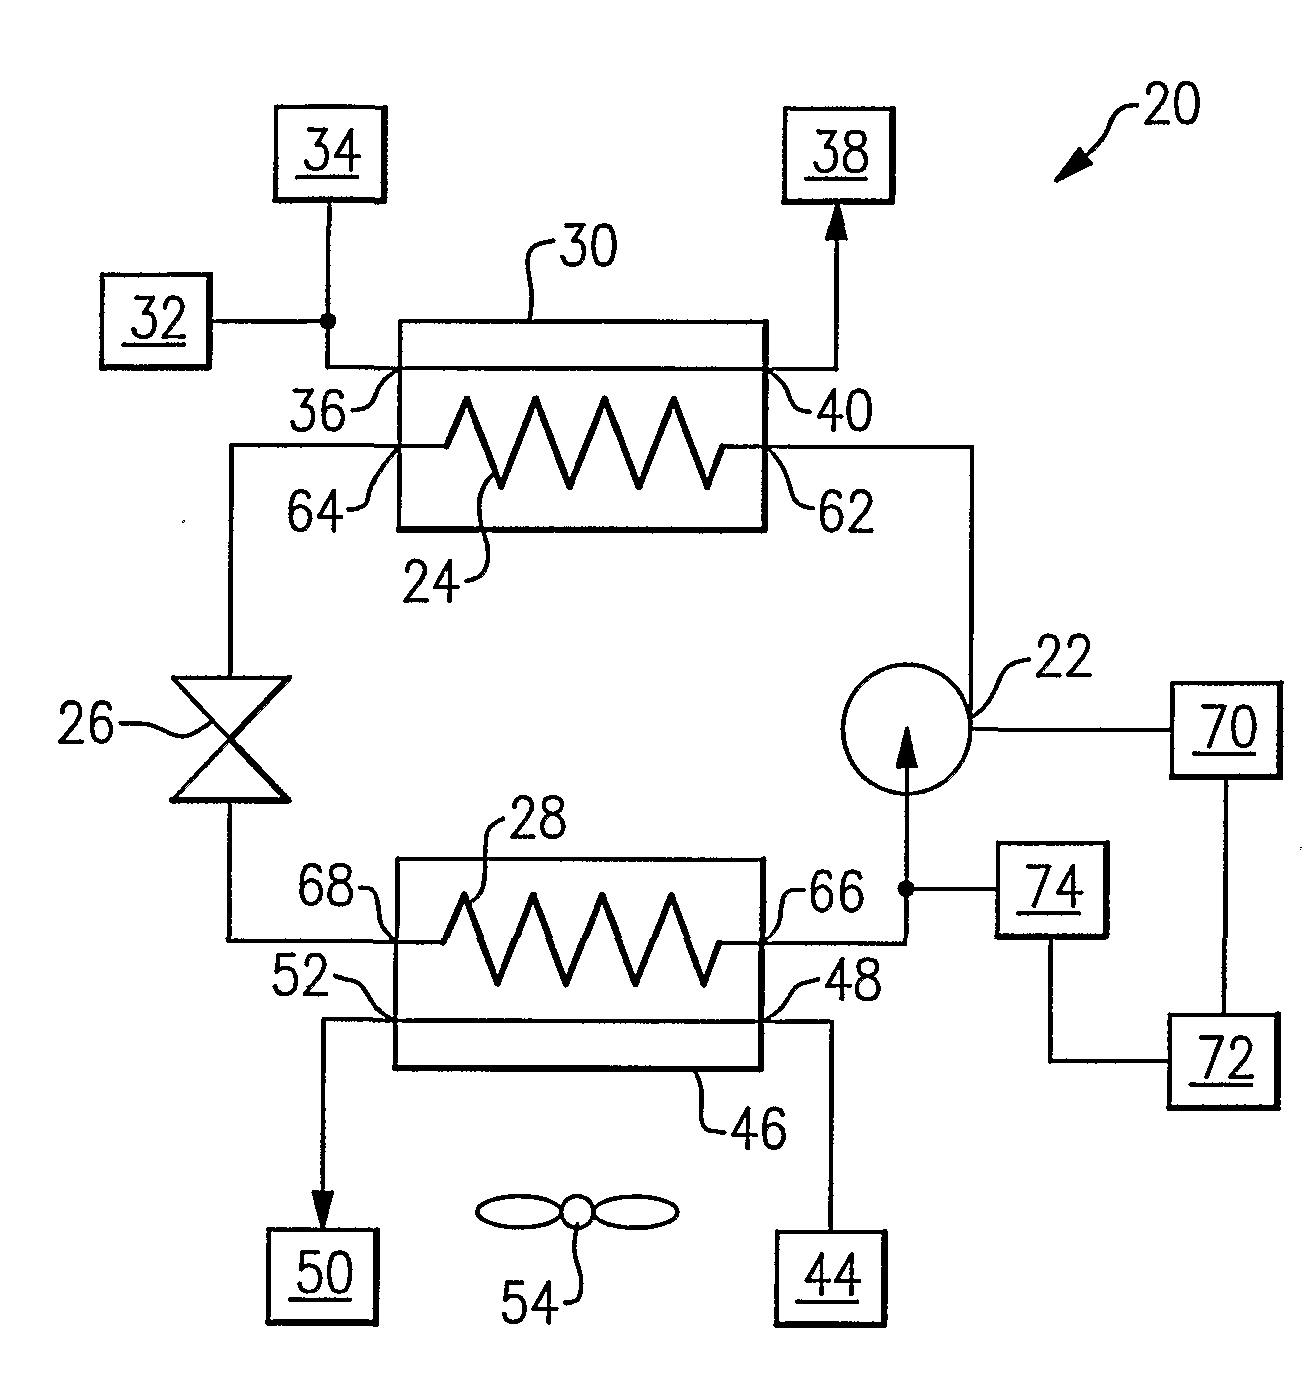 Heat Pump Water Heating System Using Variable Speed Compressor